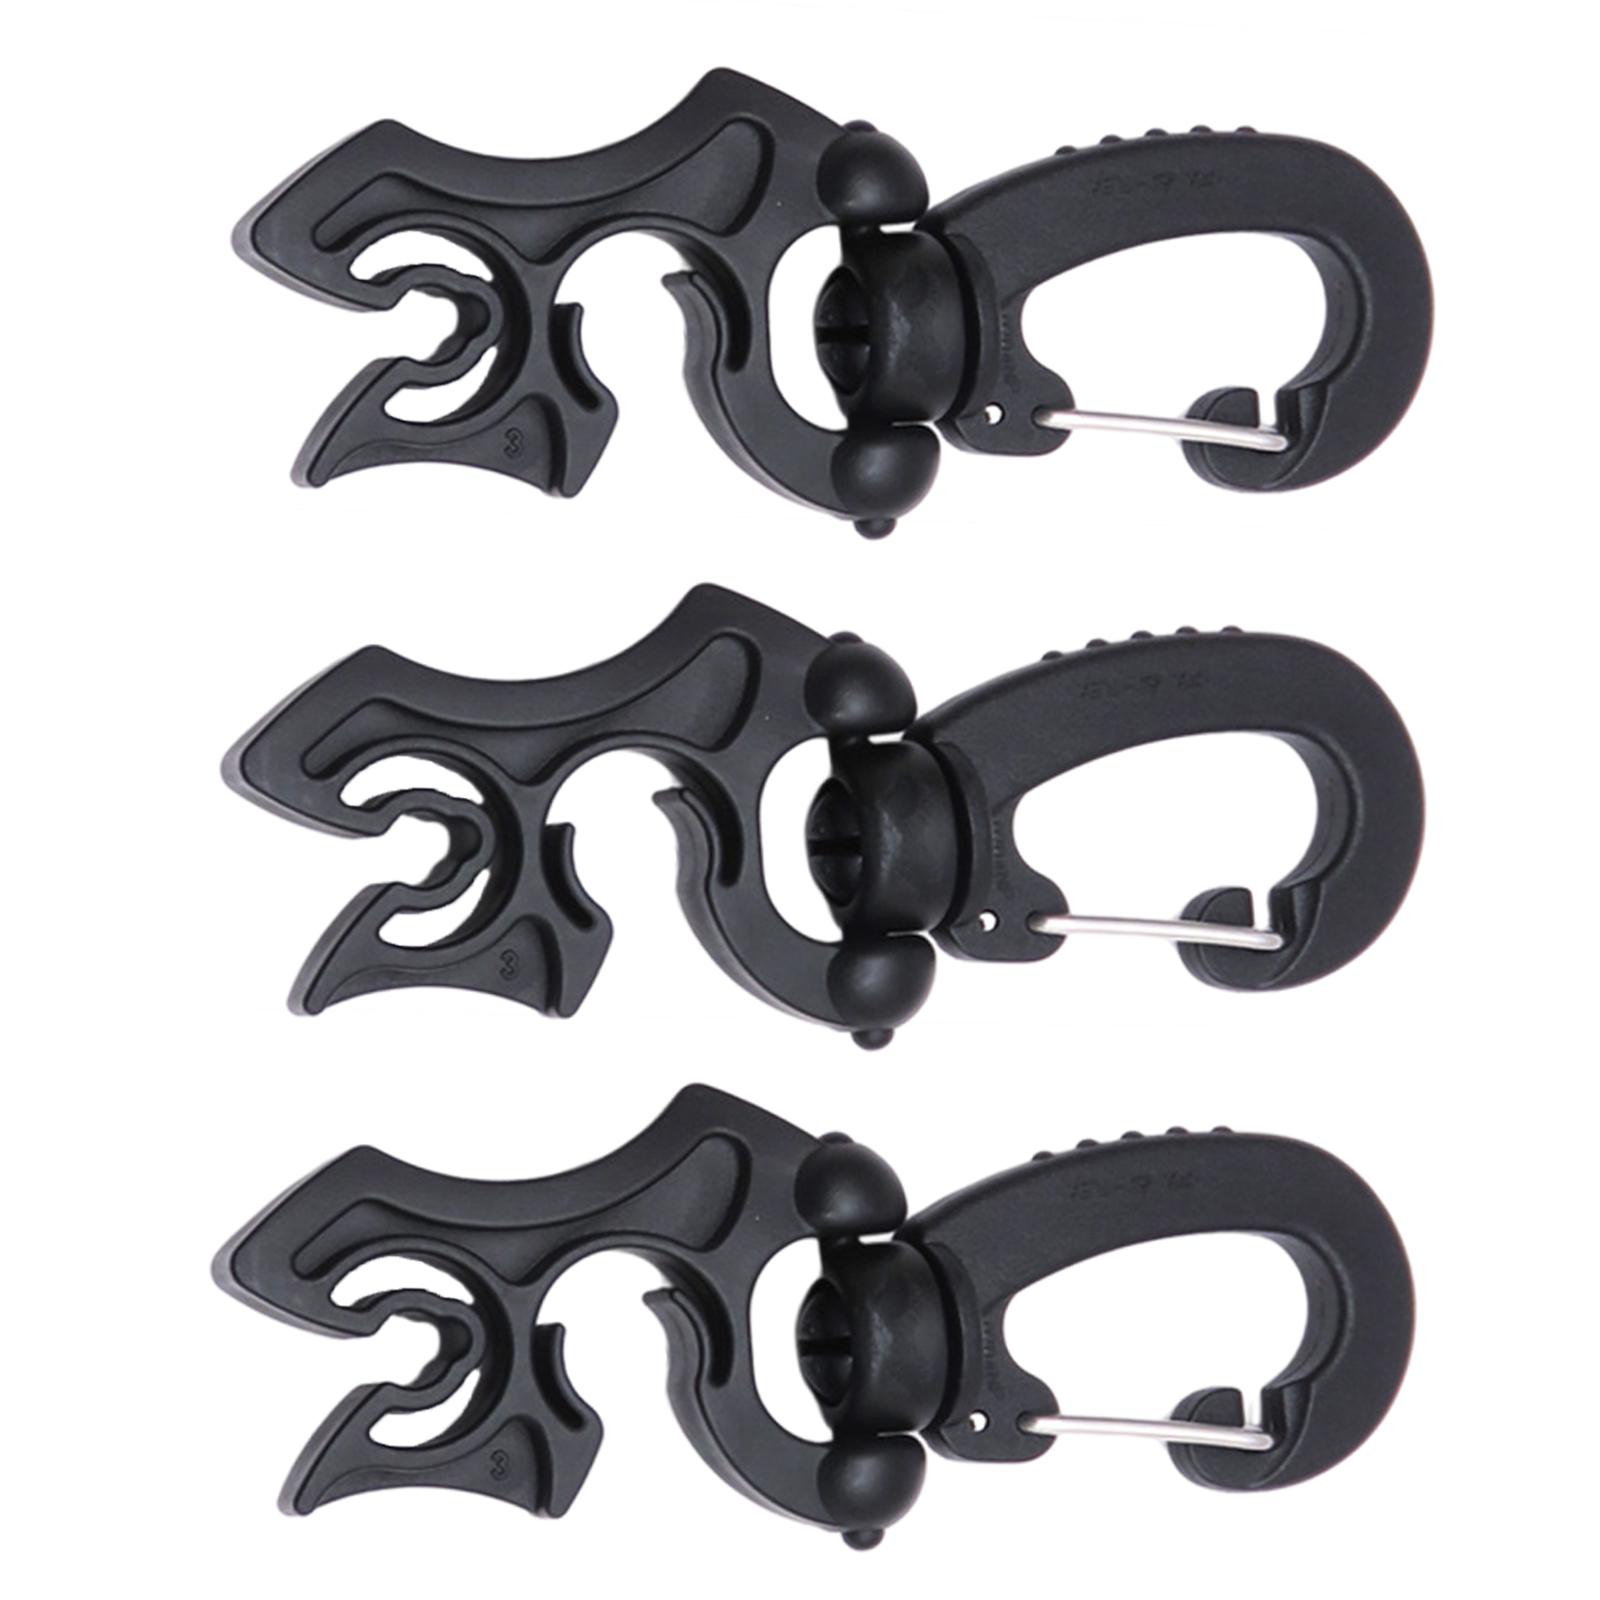 3Pcs Hose Holder with Clip Scuba Diving Double Gauges Hook Silicone Keeper